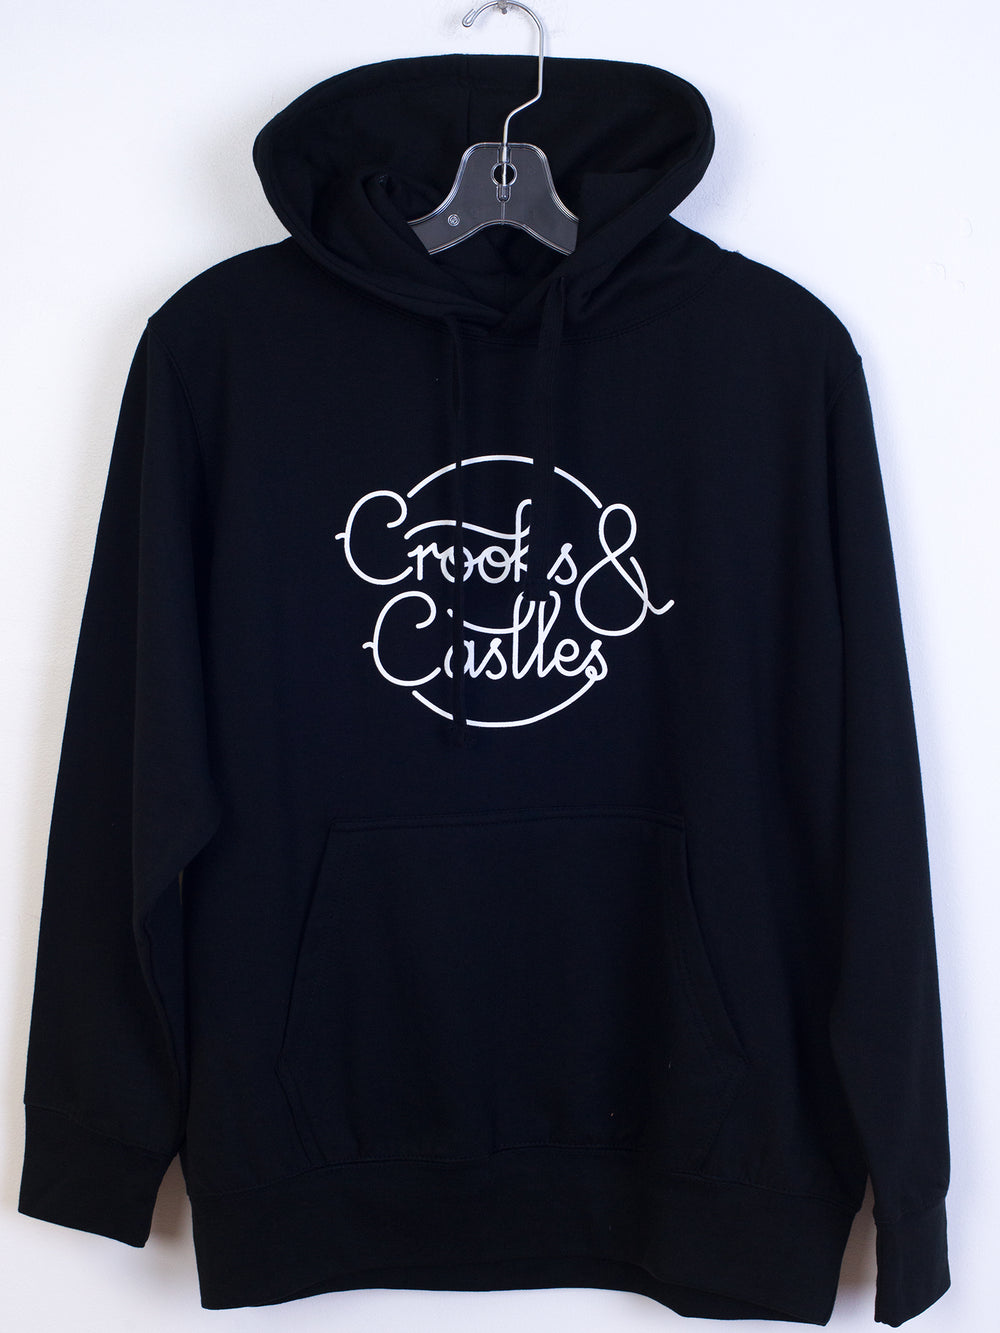 CROOKS & CASTLES SET SAIL PULLOVER HOODIE - CLEARANCE